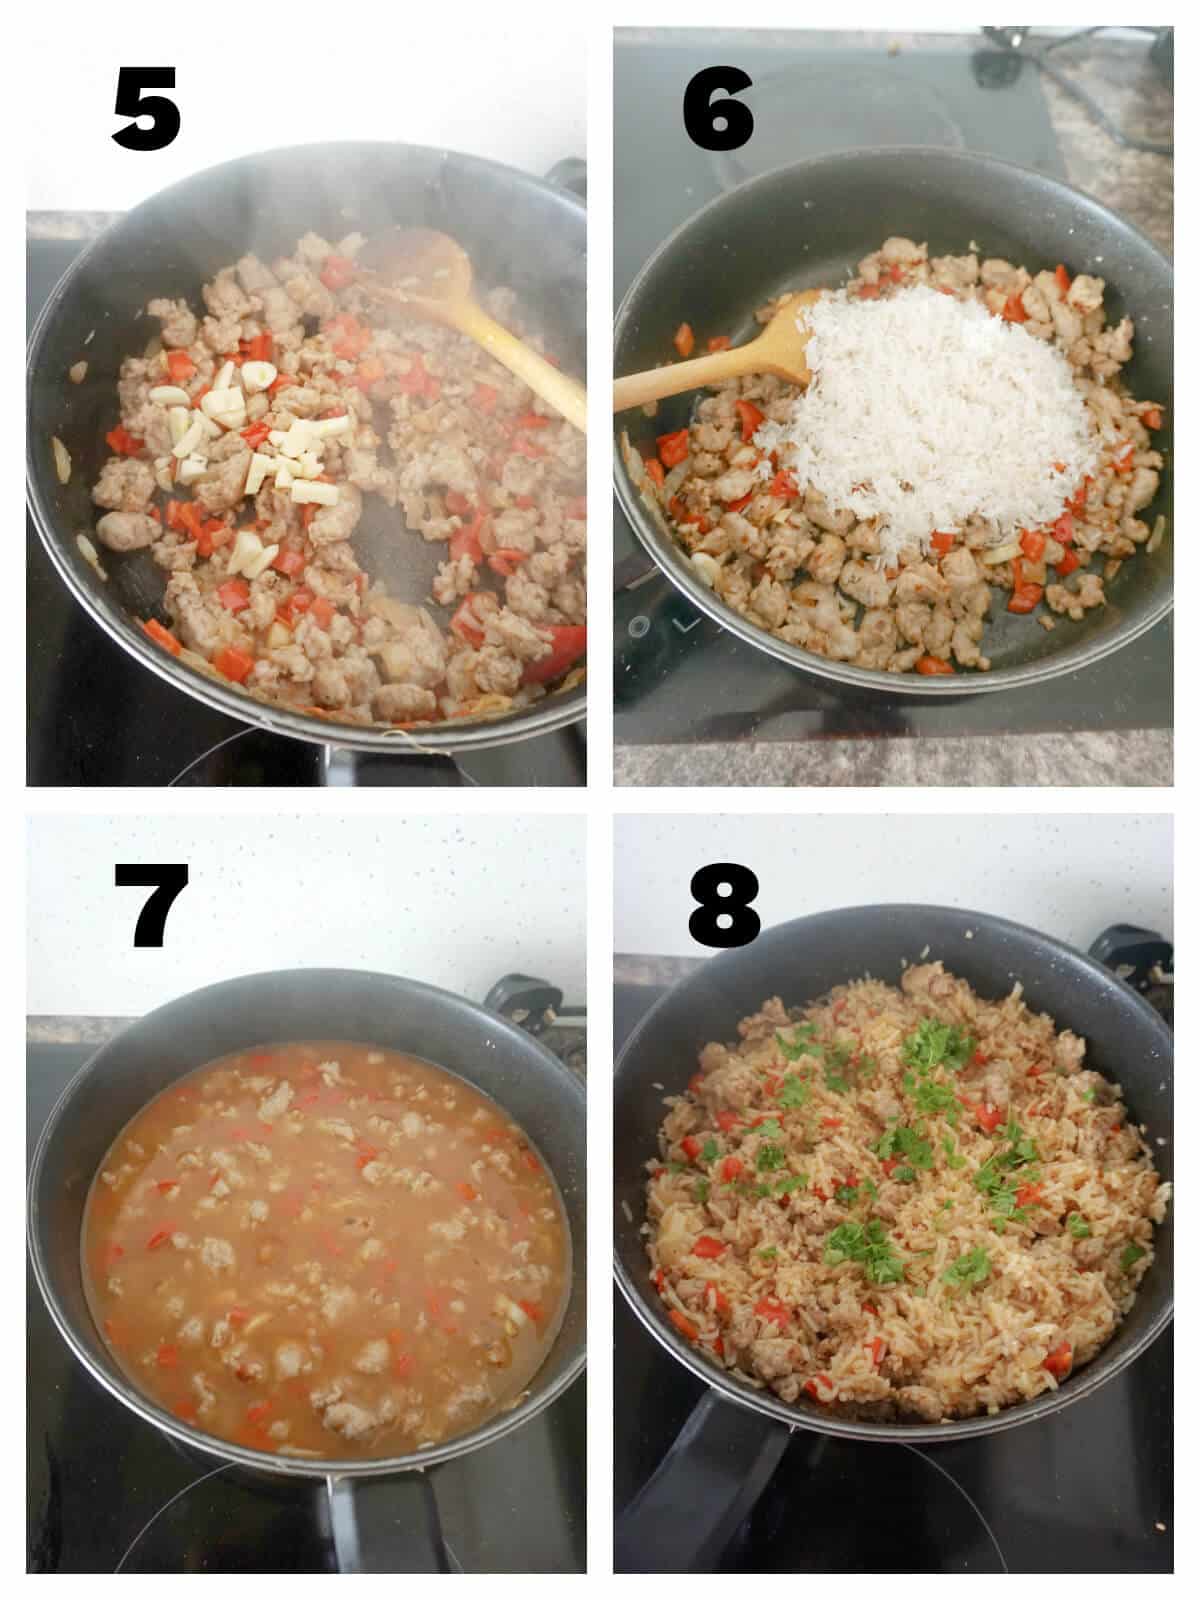 Collage of 4 photos to show how to make sausage rice.